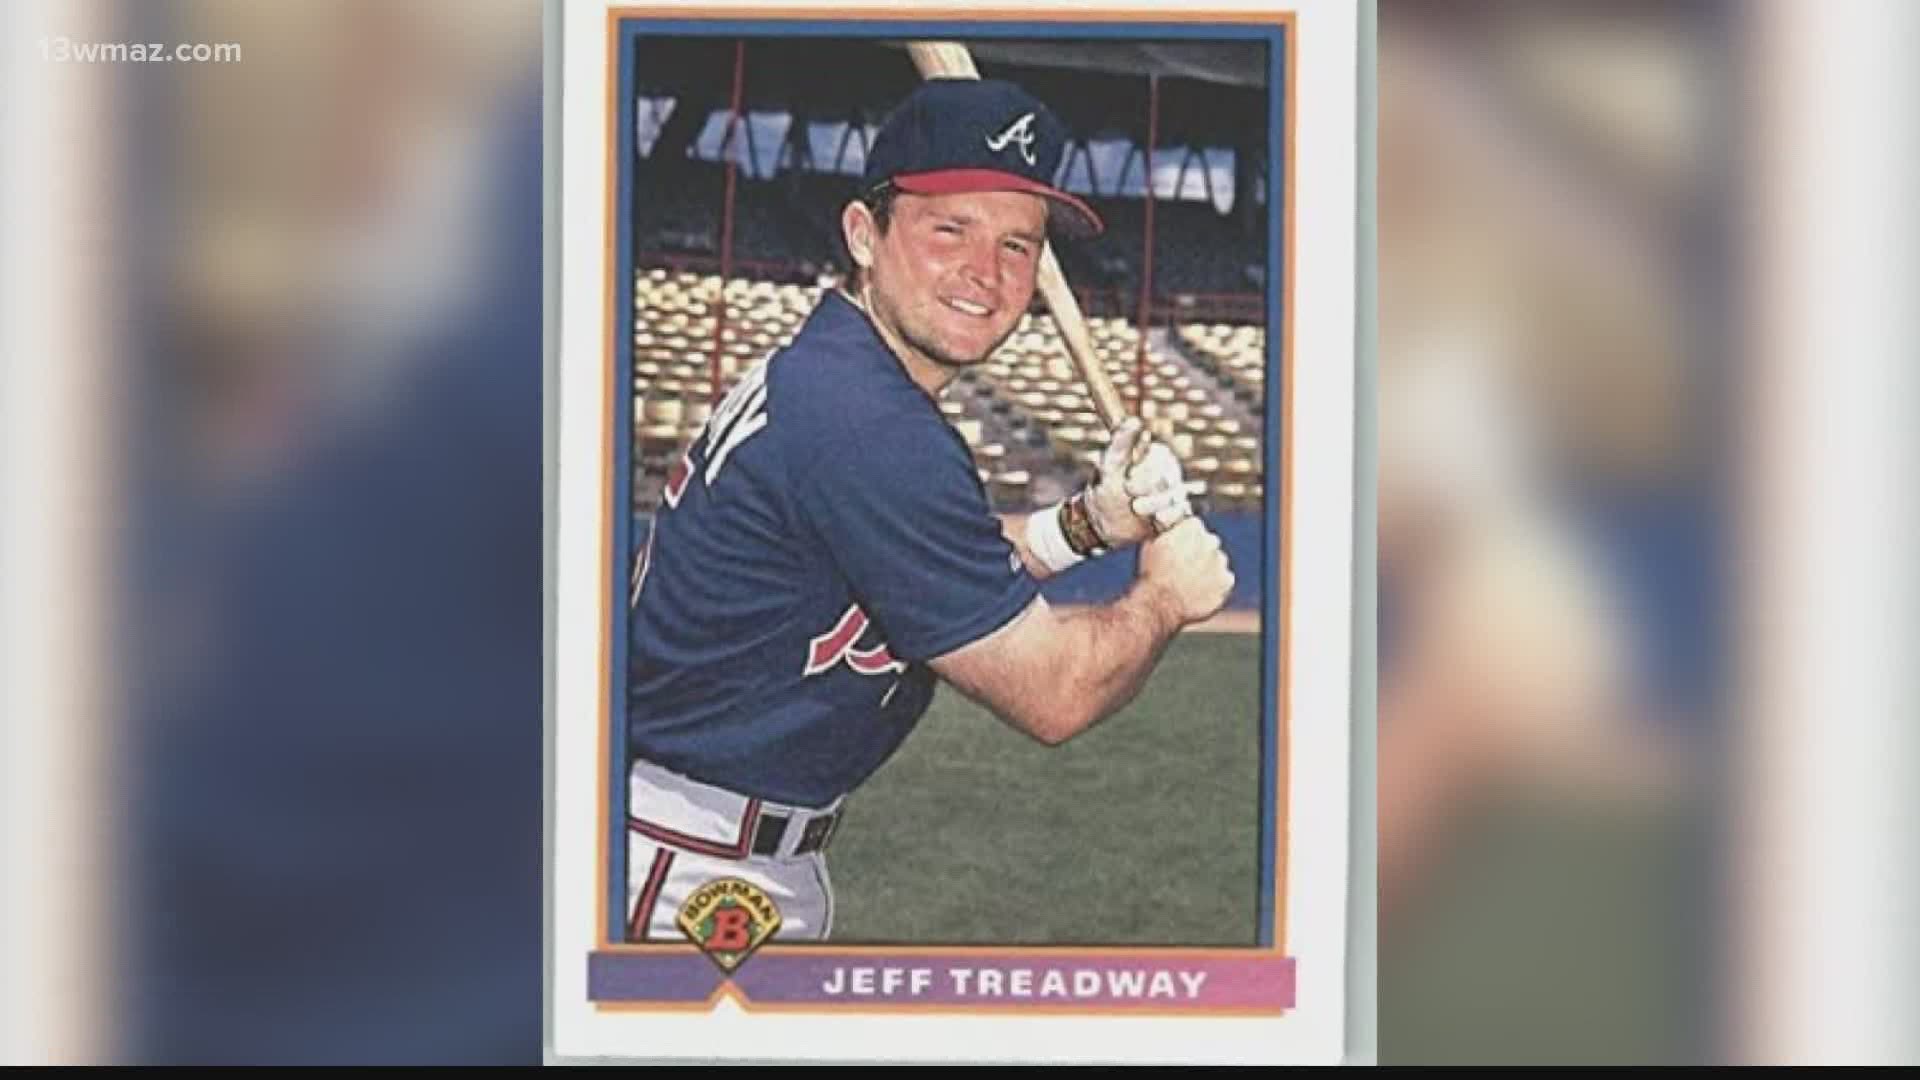 Jeff Treadway played for the Atlanta Braves and has coached for 20 years.